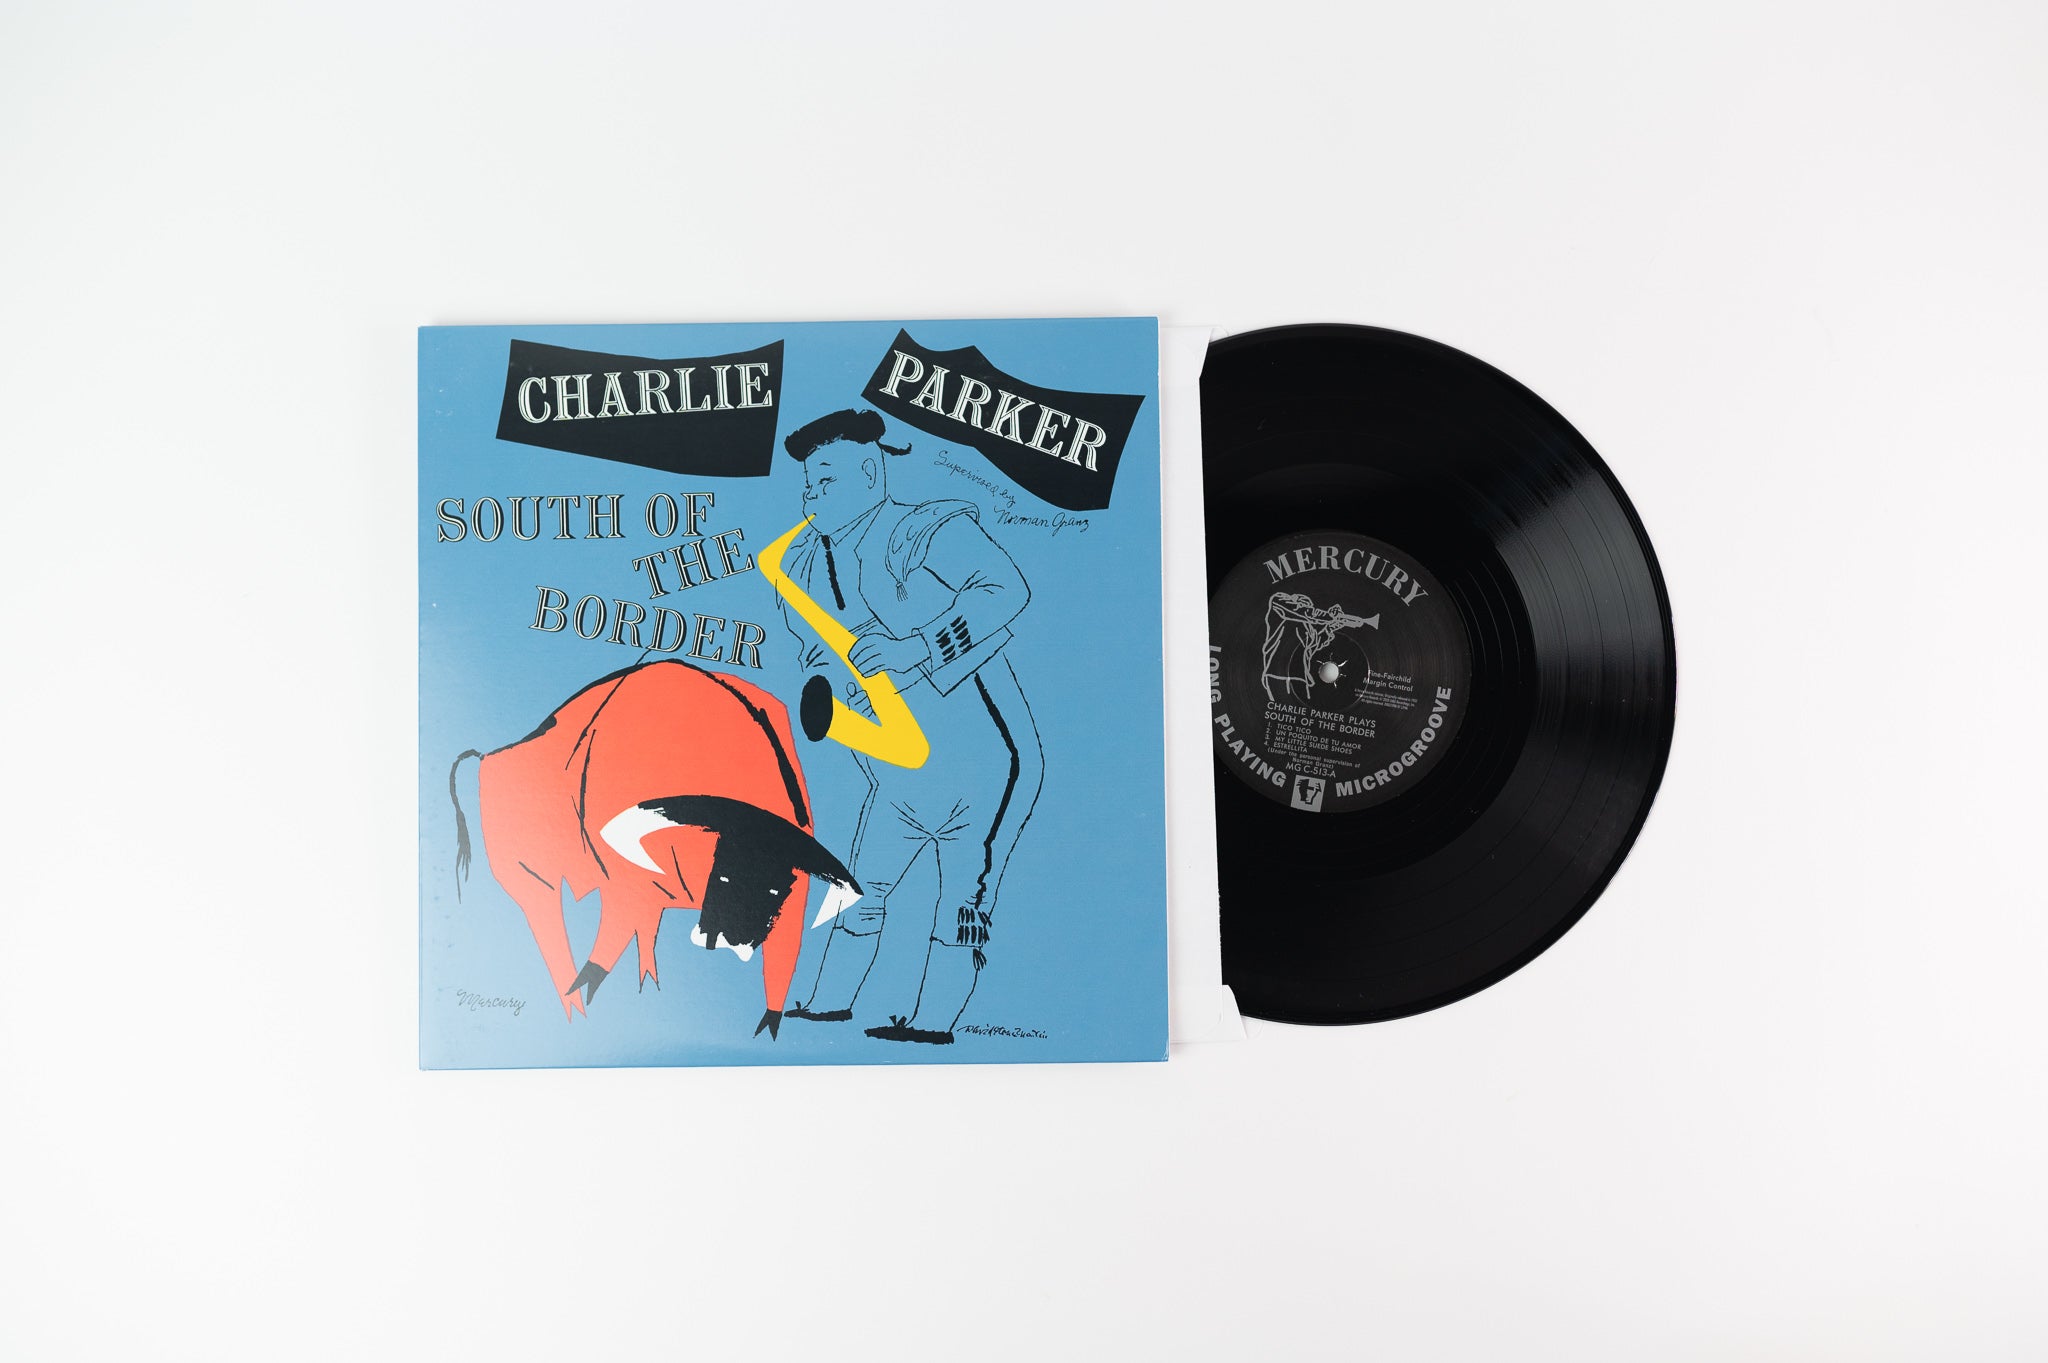 Charlie Parker - The Mercury & Clef 10-Inch LP Collection